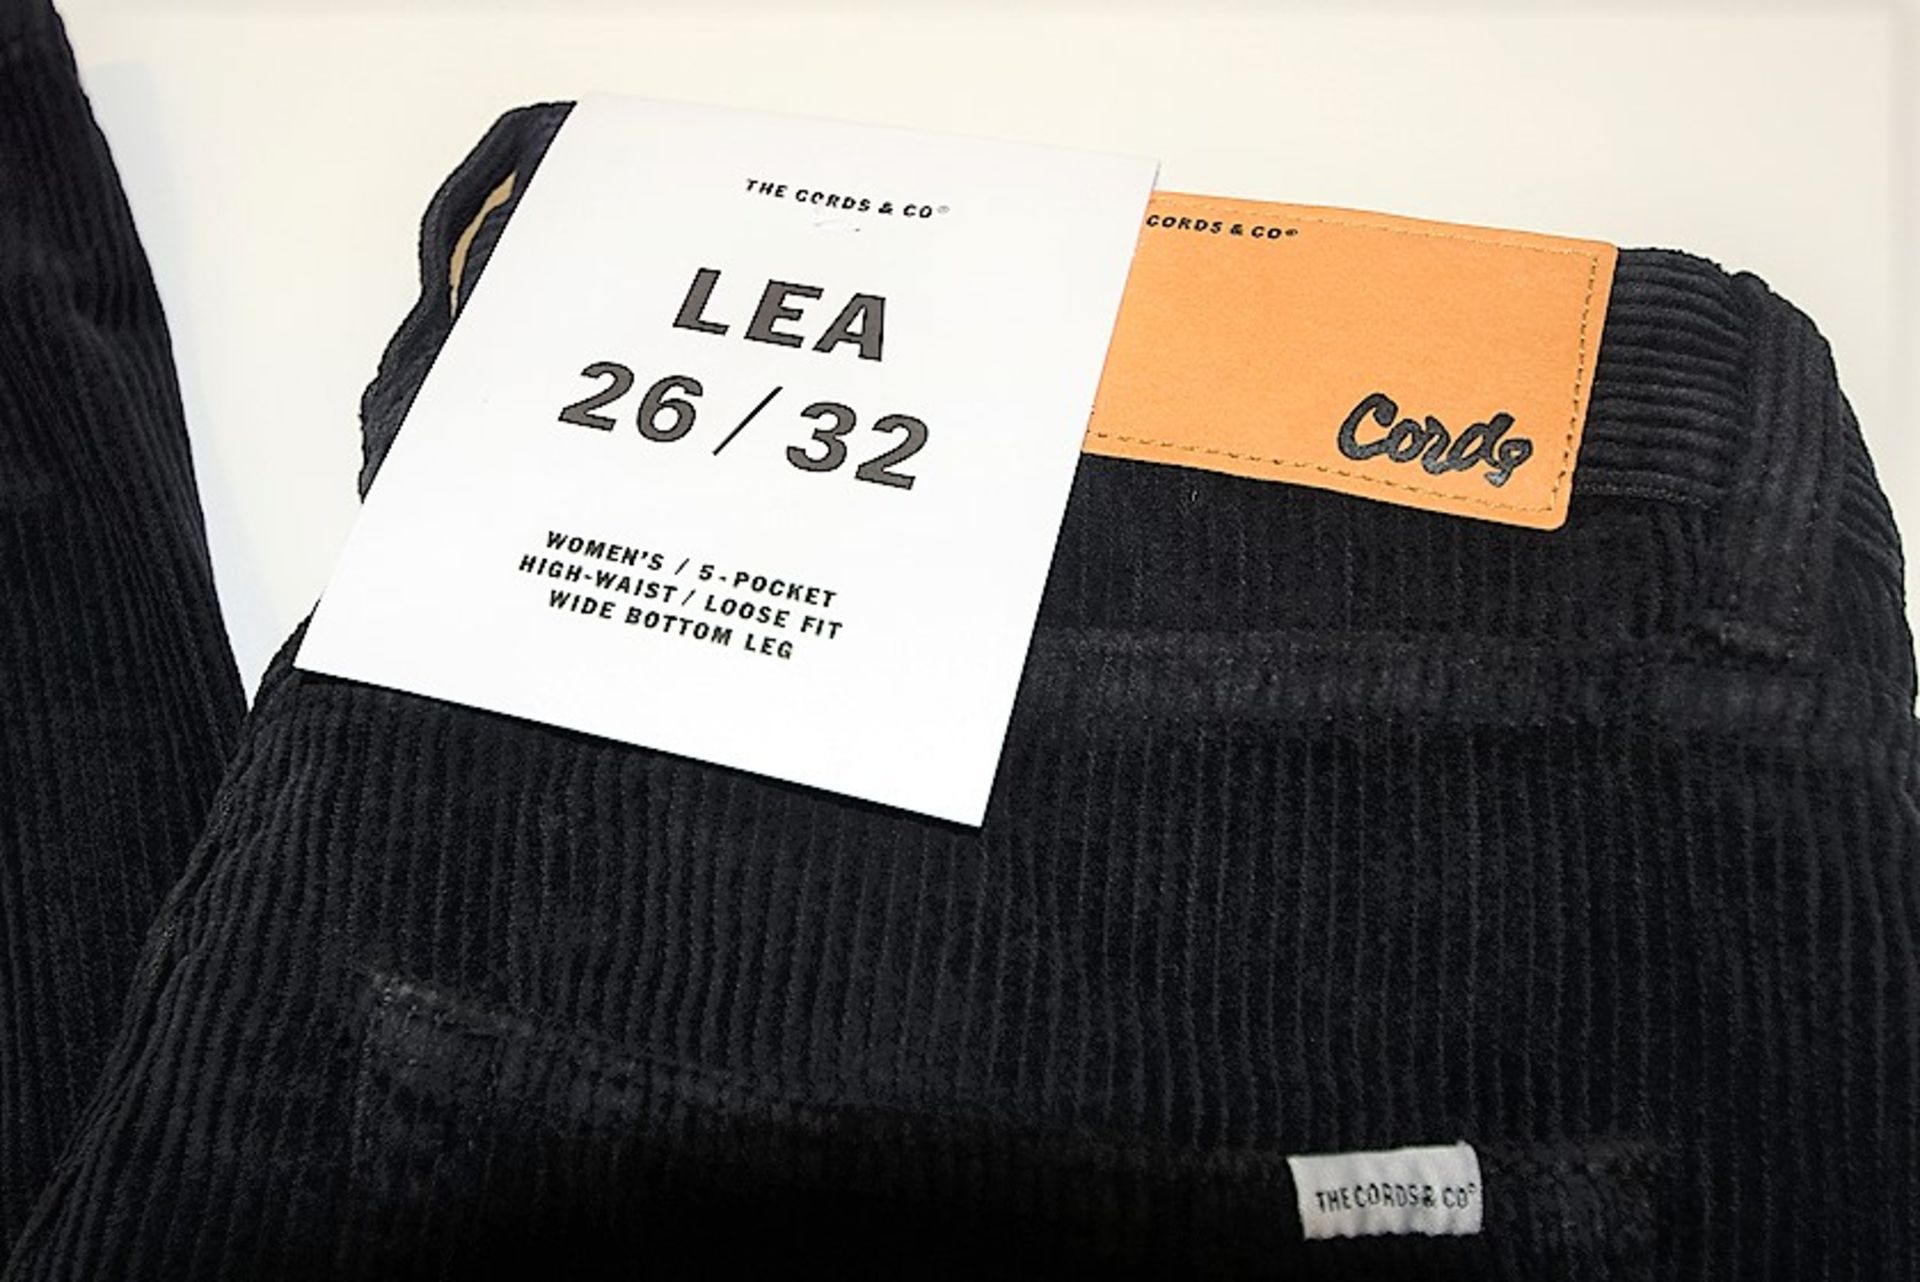 The Cords & Co. "Lea" Women's/ High-Waist/ Loose Fit/ Wide Bottom Pants MSRP $160 - Image 2 of 7